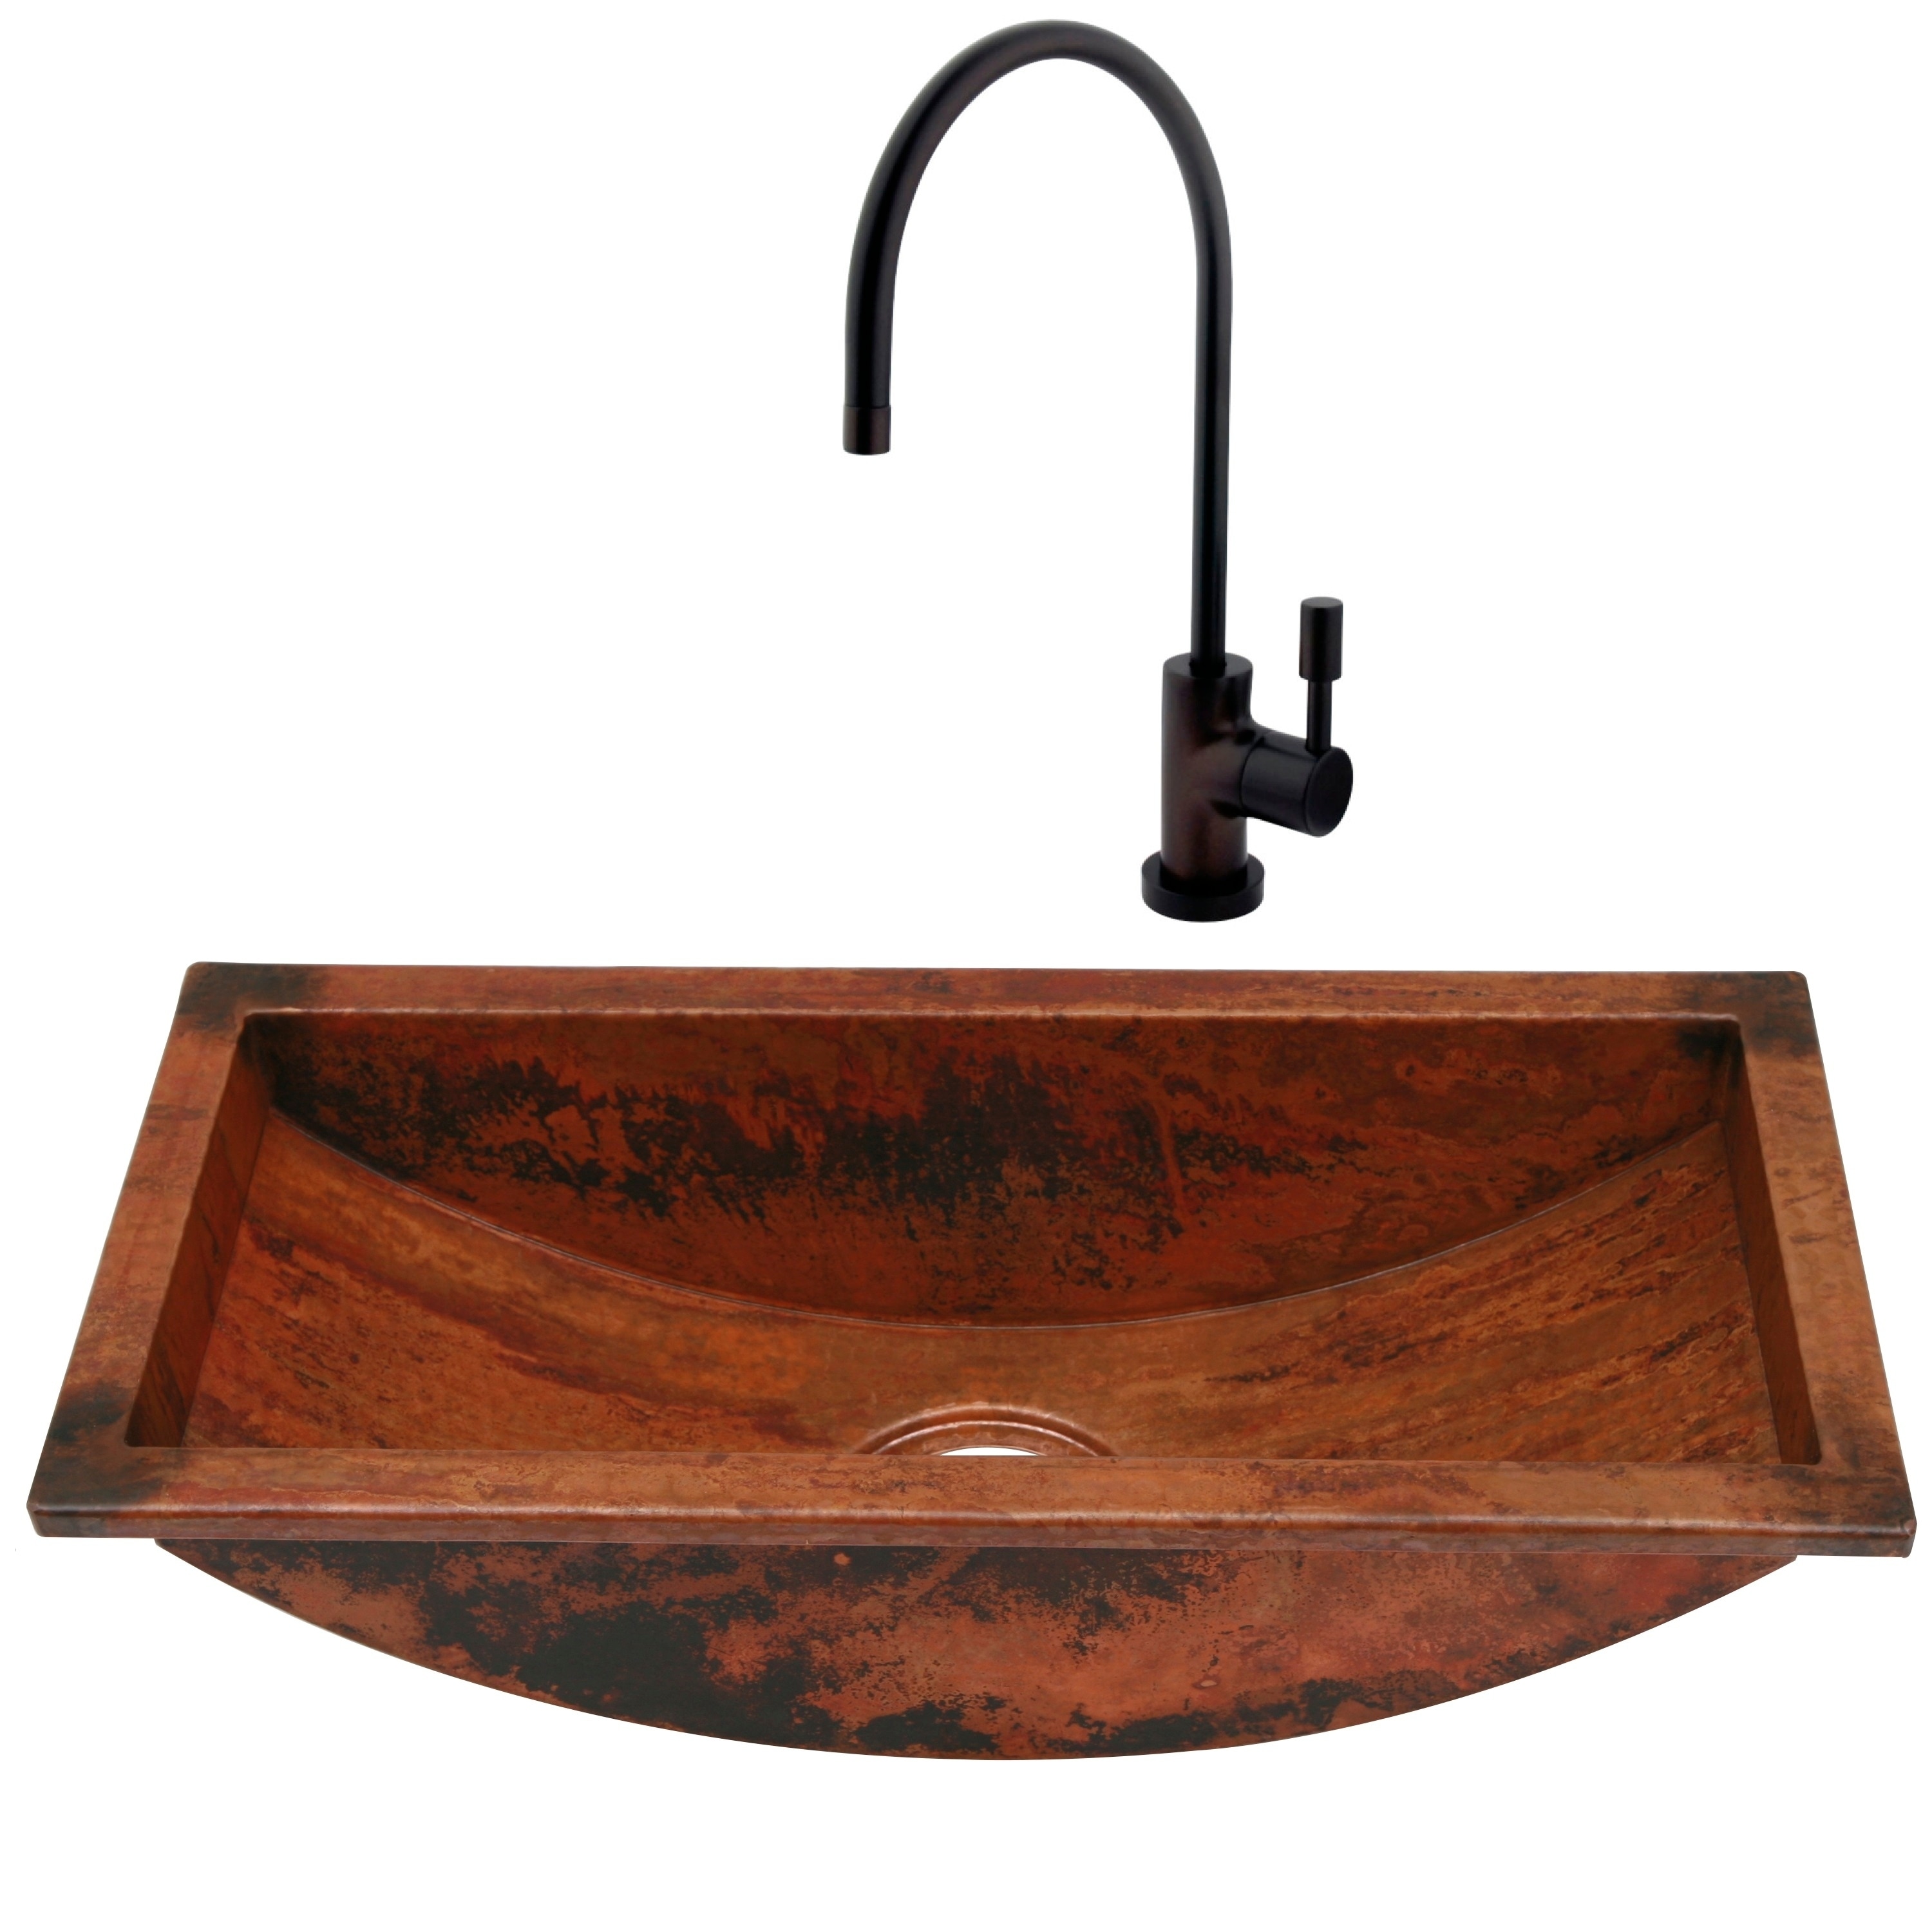 Unikwities 22x10x6 Inch Copper Trough Sink With Cold Water Faucet